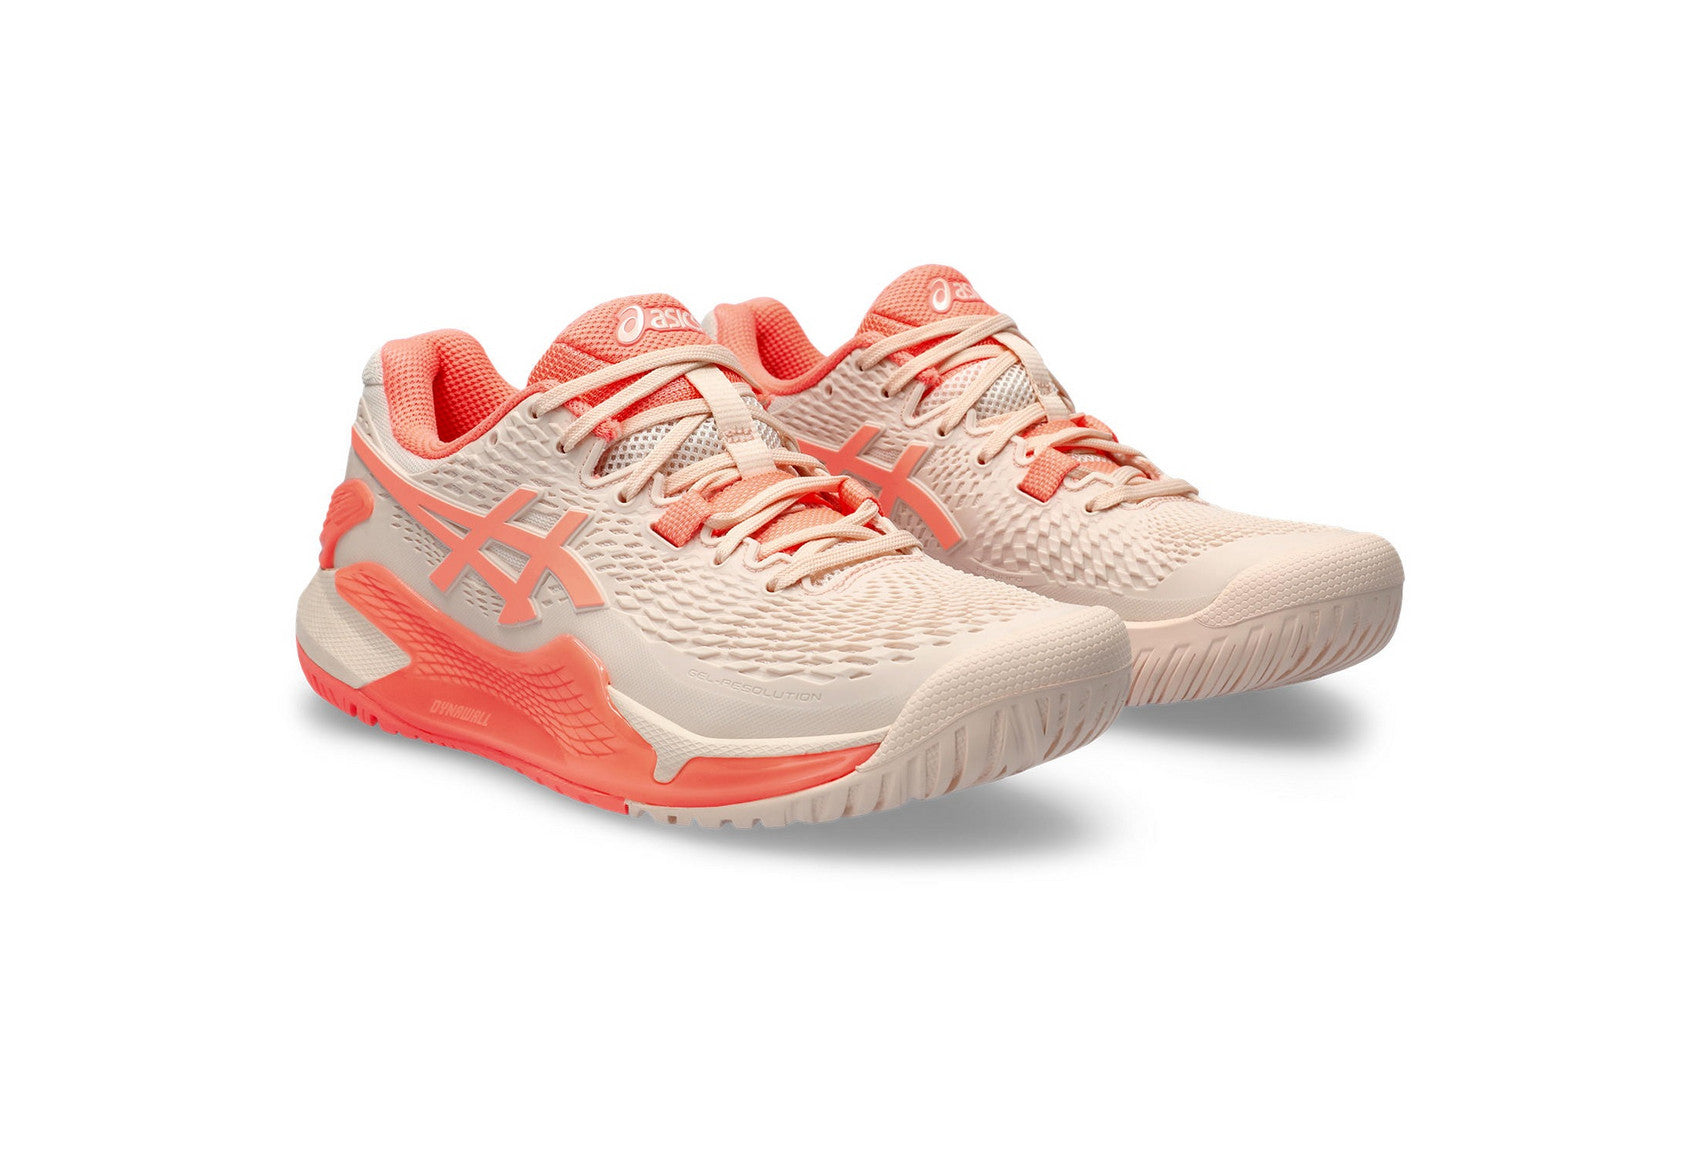 Asics Women's GEL-RESOLUTION 9 Tennis Shoes in Pearl Pink/Sun Coral